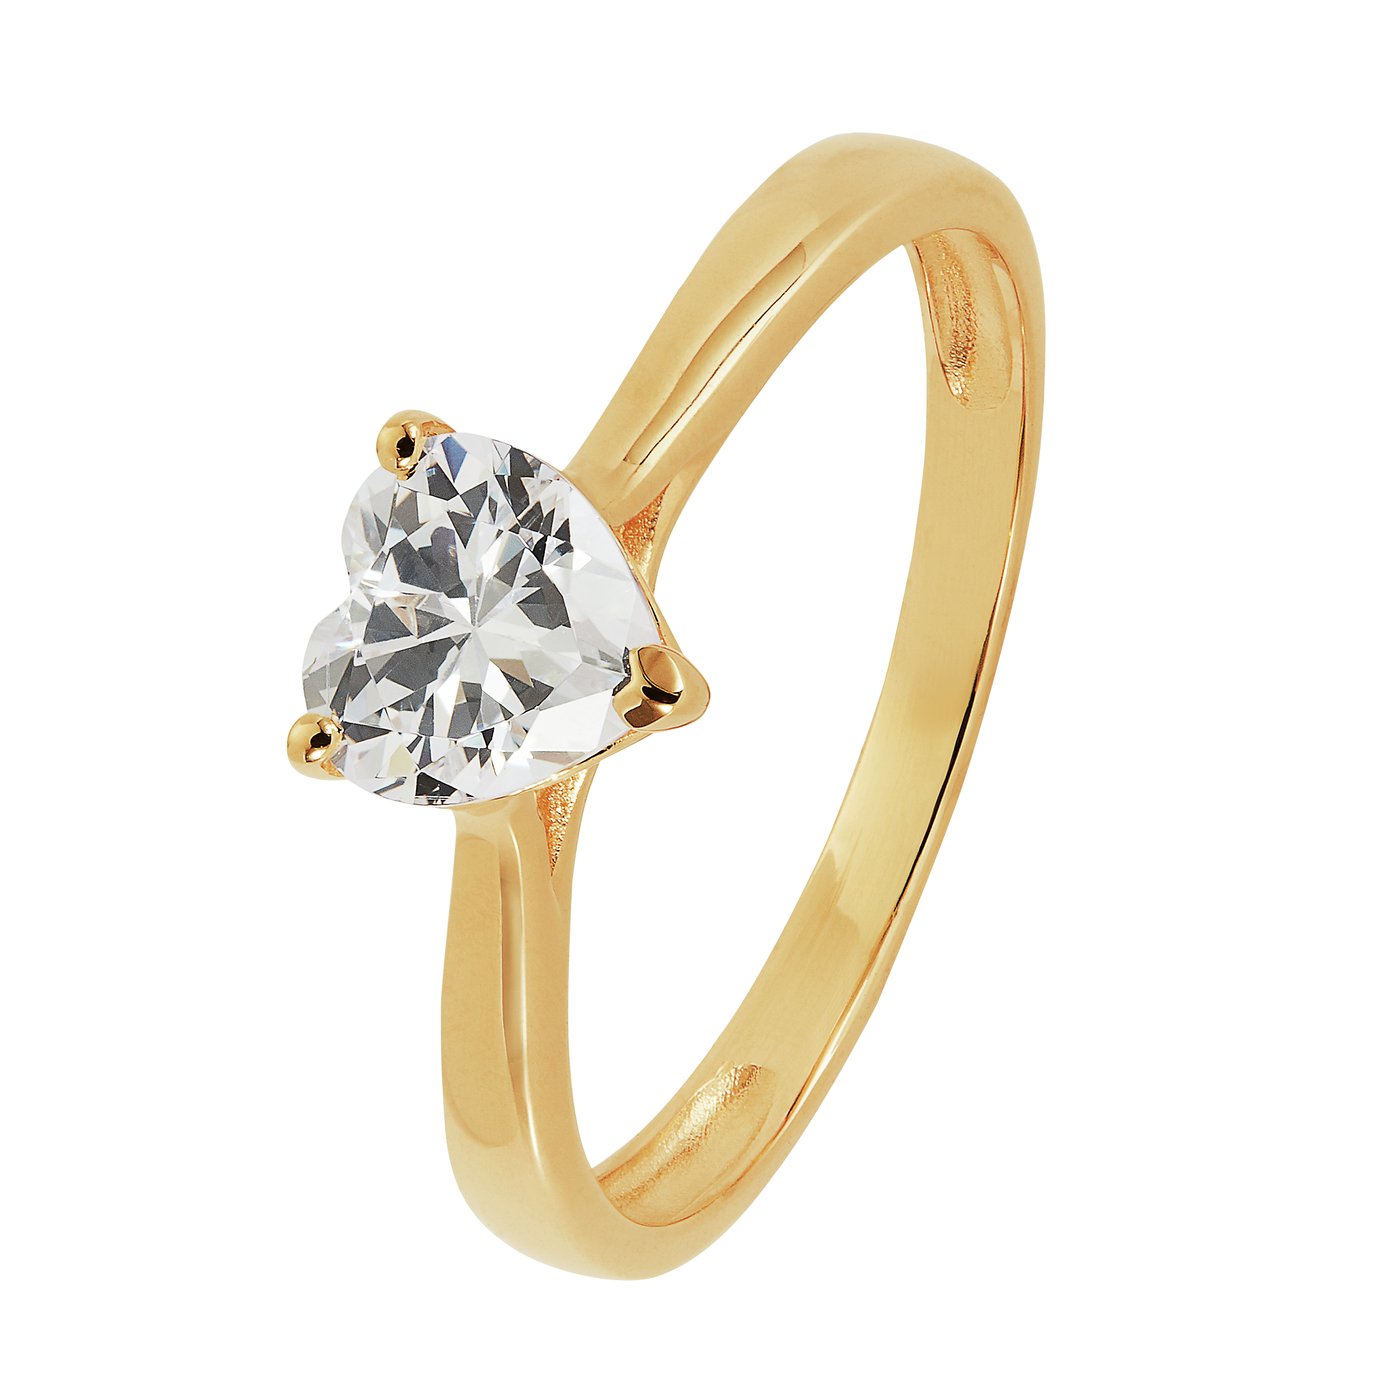 Revere 9ct Gold Cubic Zirconia Engagement Ring - O